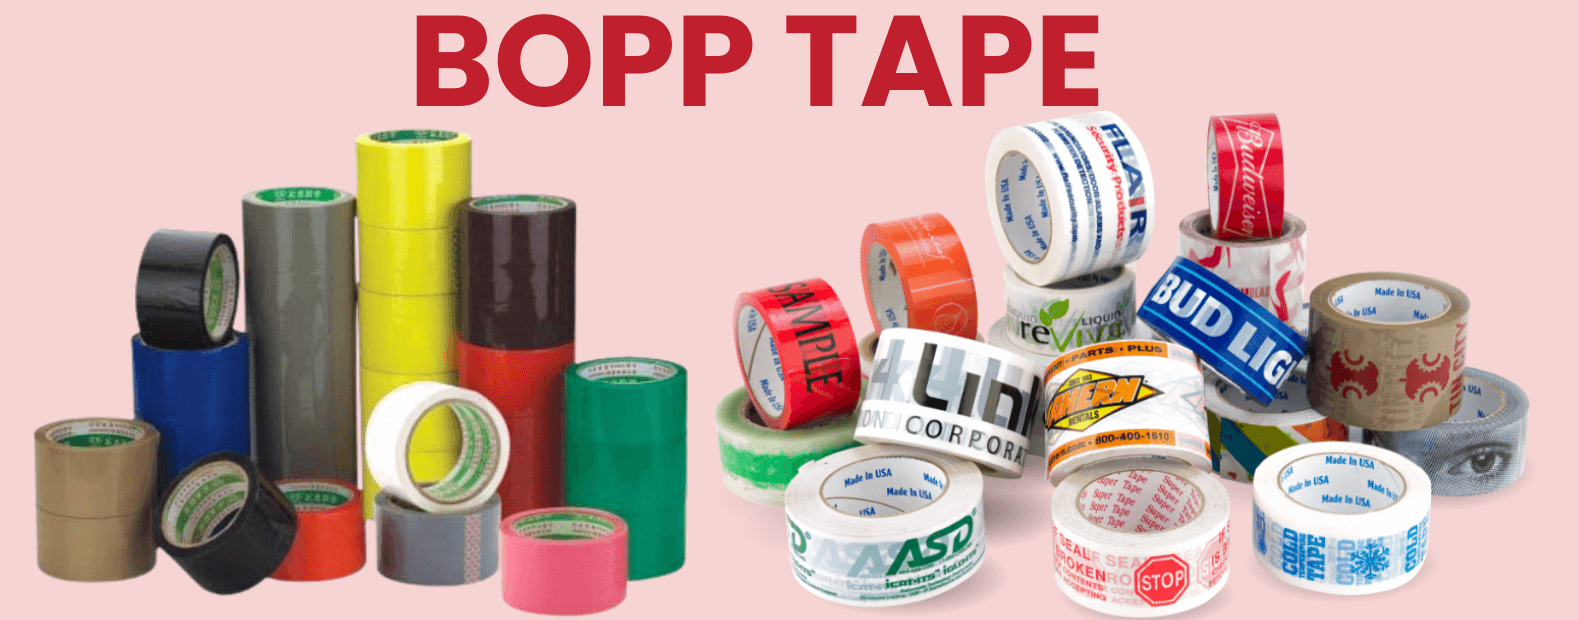 bopp best tape manufacturer and supplier in gurgaon bhiwadi bawal